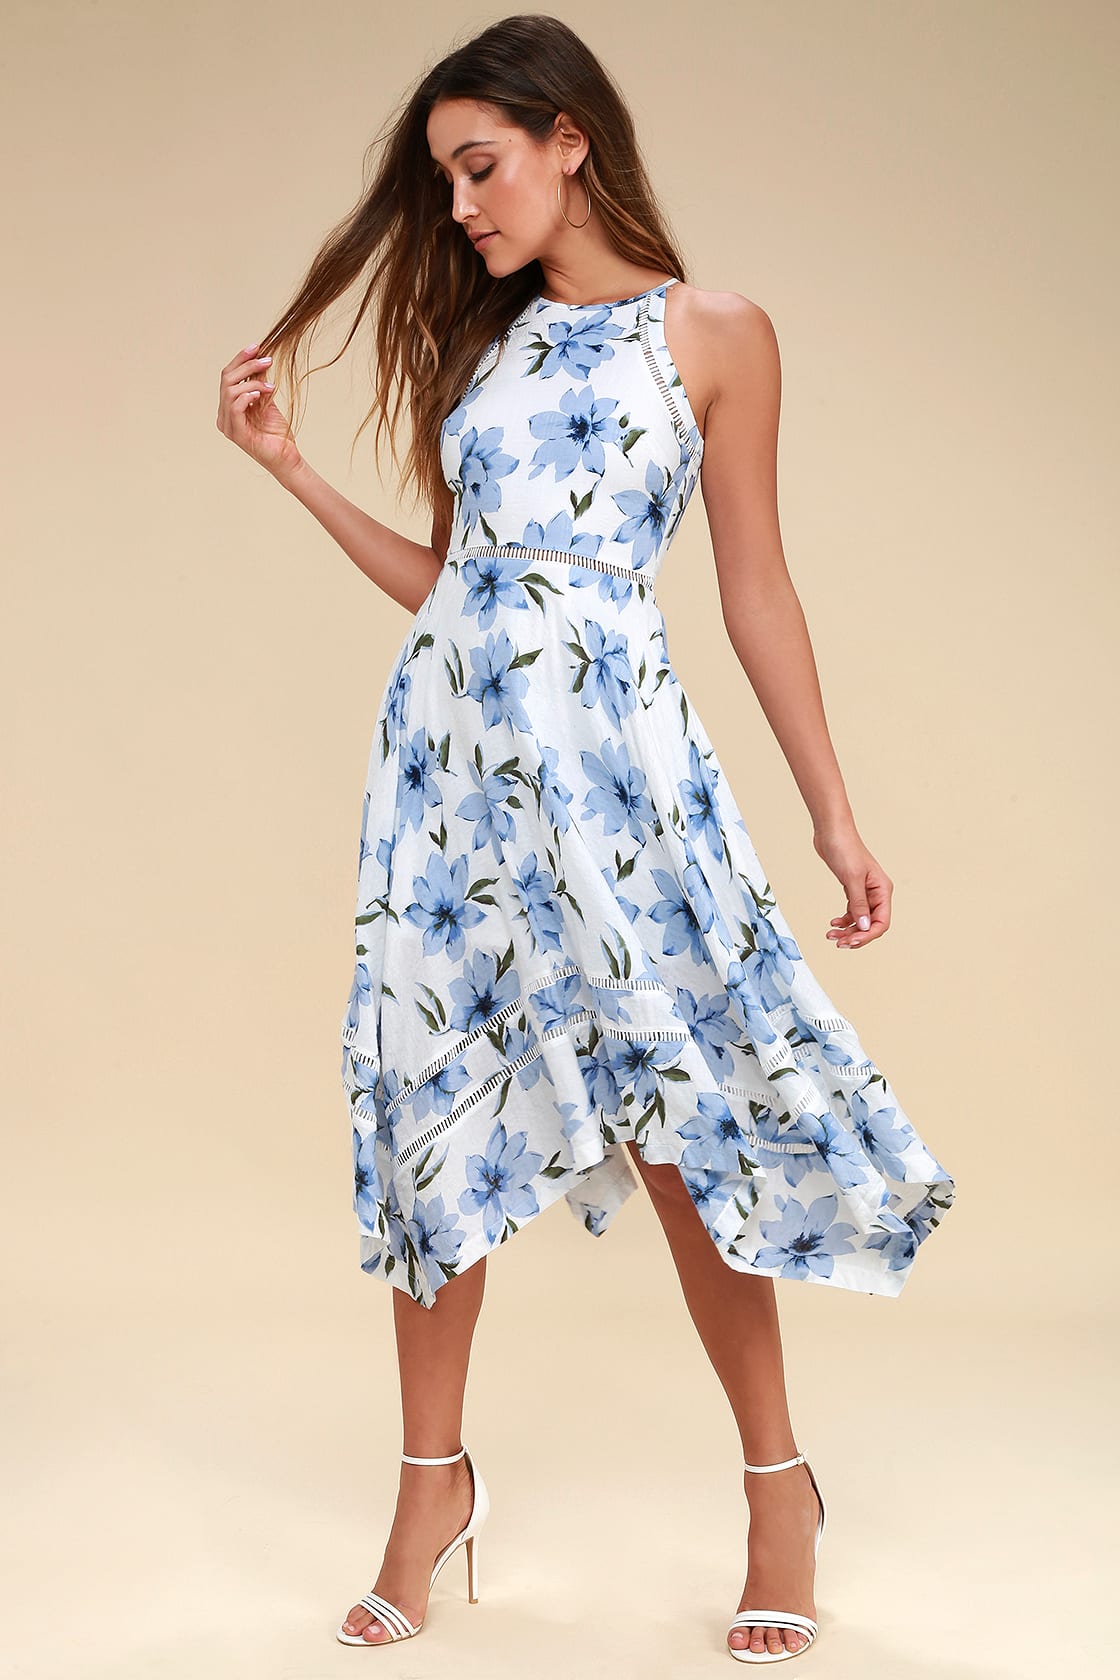 Blue and White Floral Midi Dress for Greece Vacation Outfit